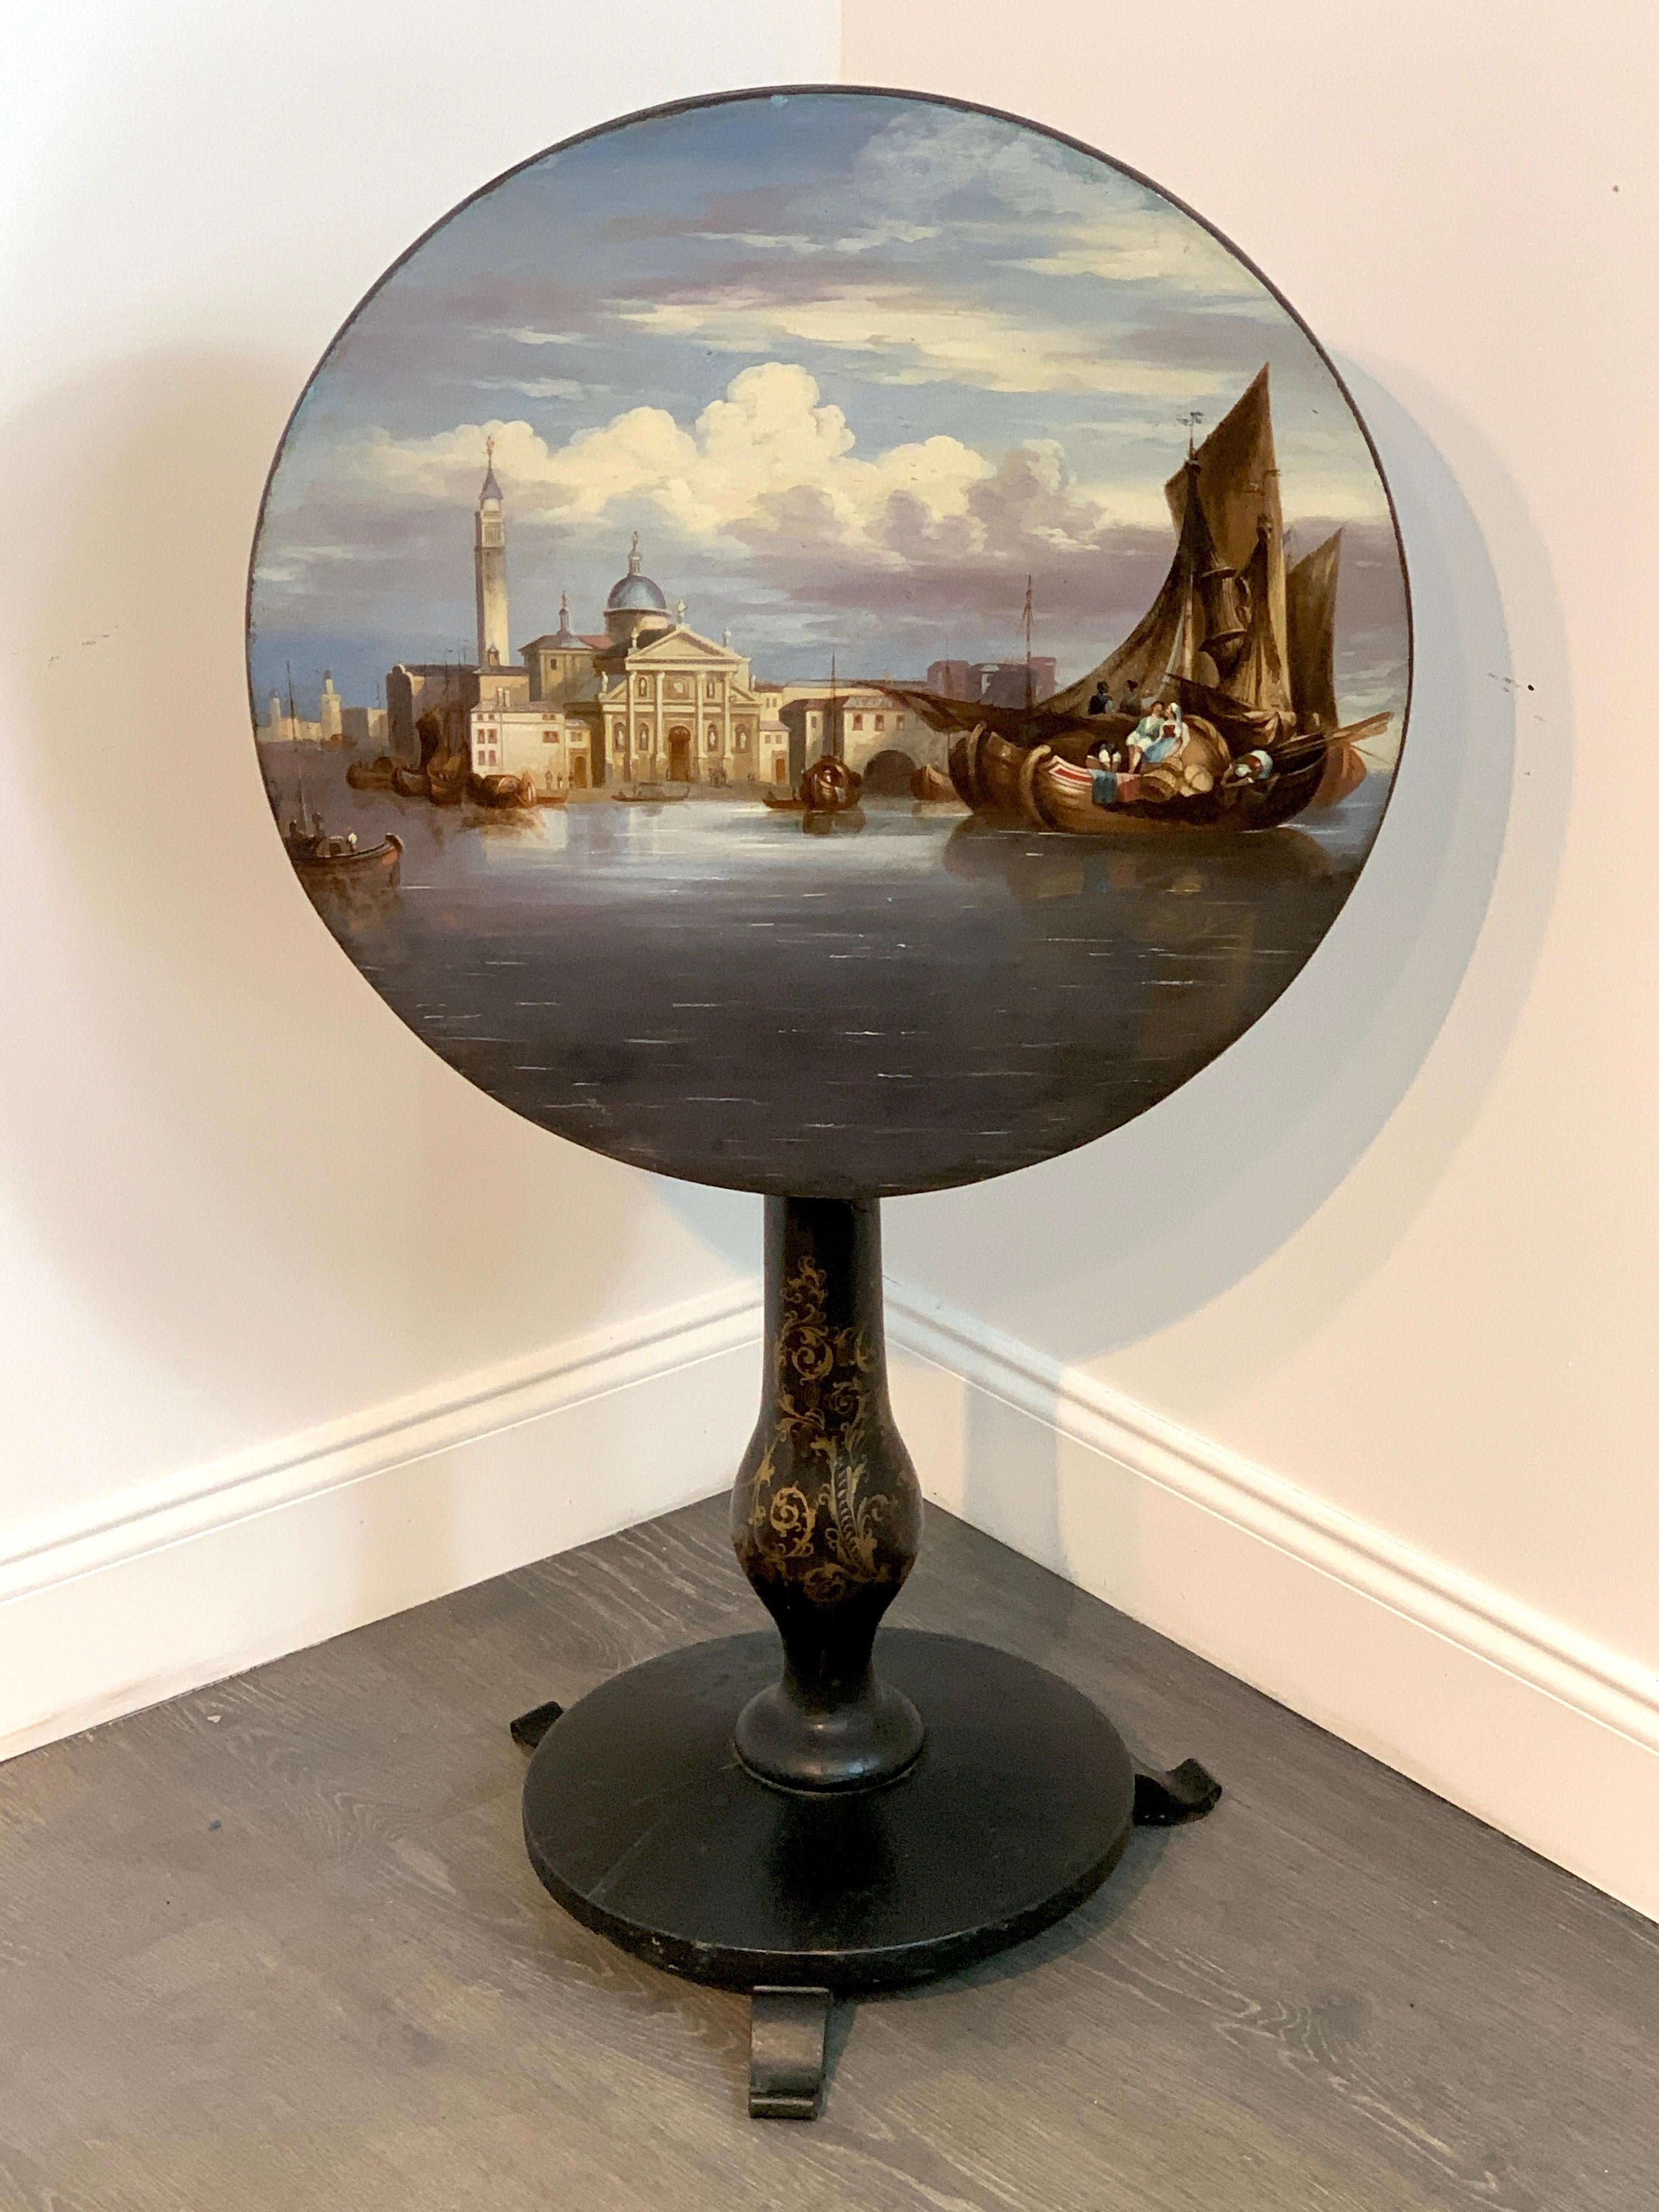 19th century English papier mâché tilt-top table view of St Marks Square, exquisitely painted with a Grand Tour topographical view, on a pedestal base.
Table stands 28.75